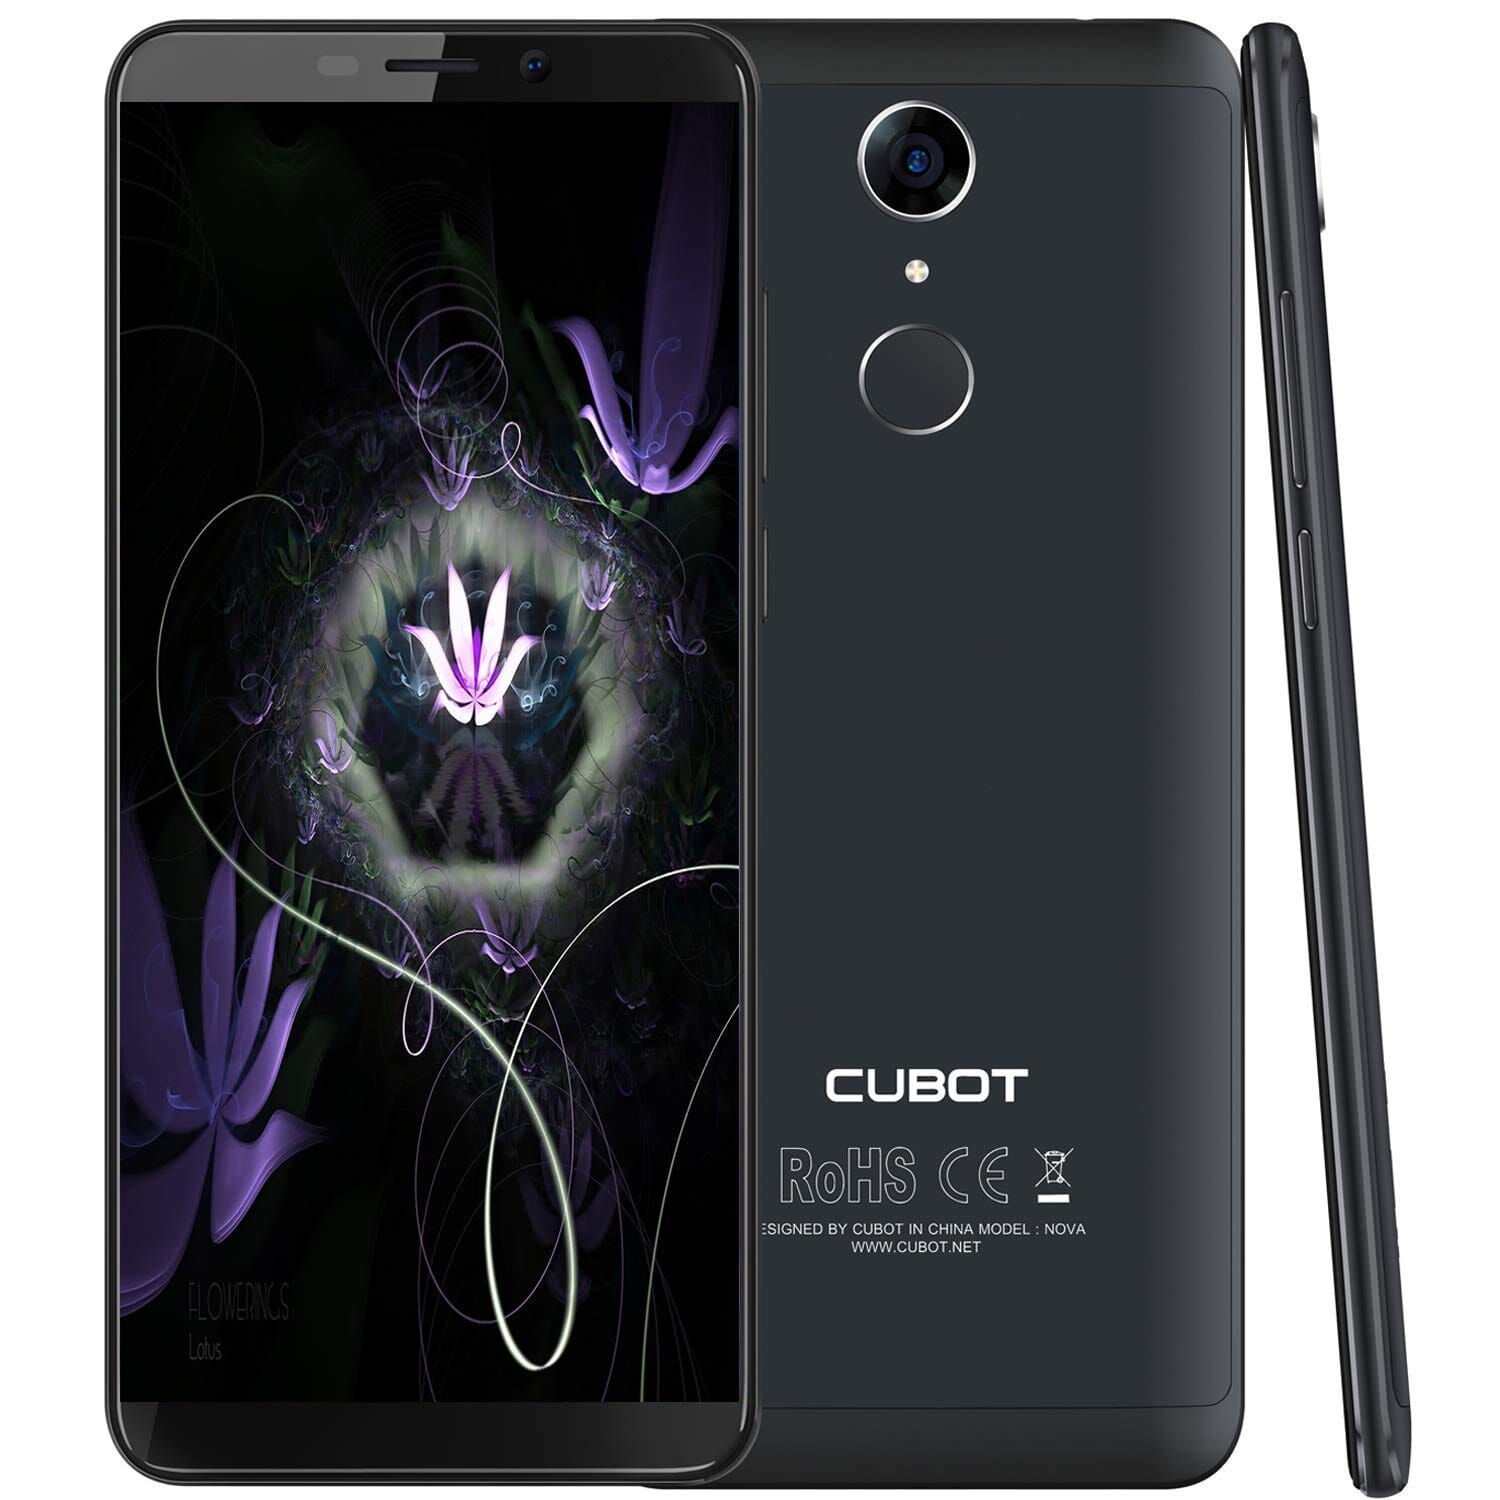 Cubot J3 Pro 1/16GB Android Go a 86€